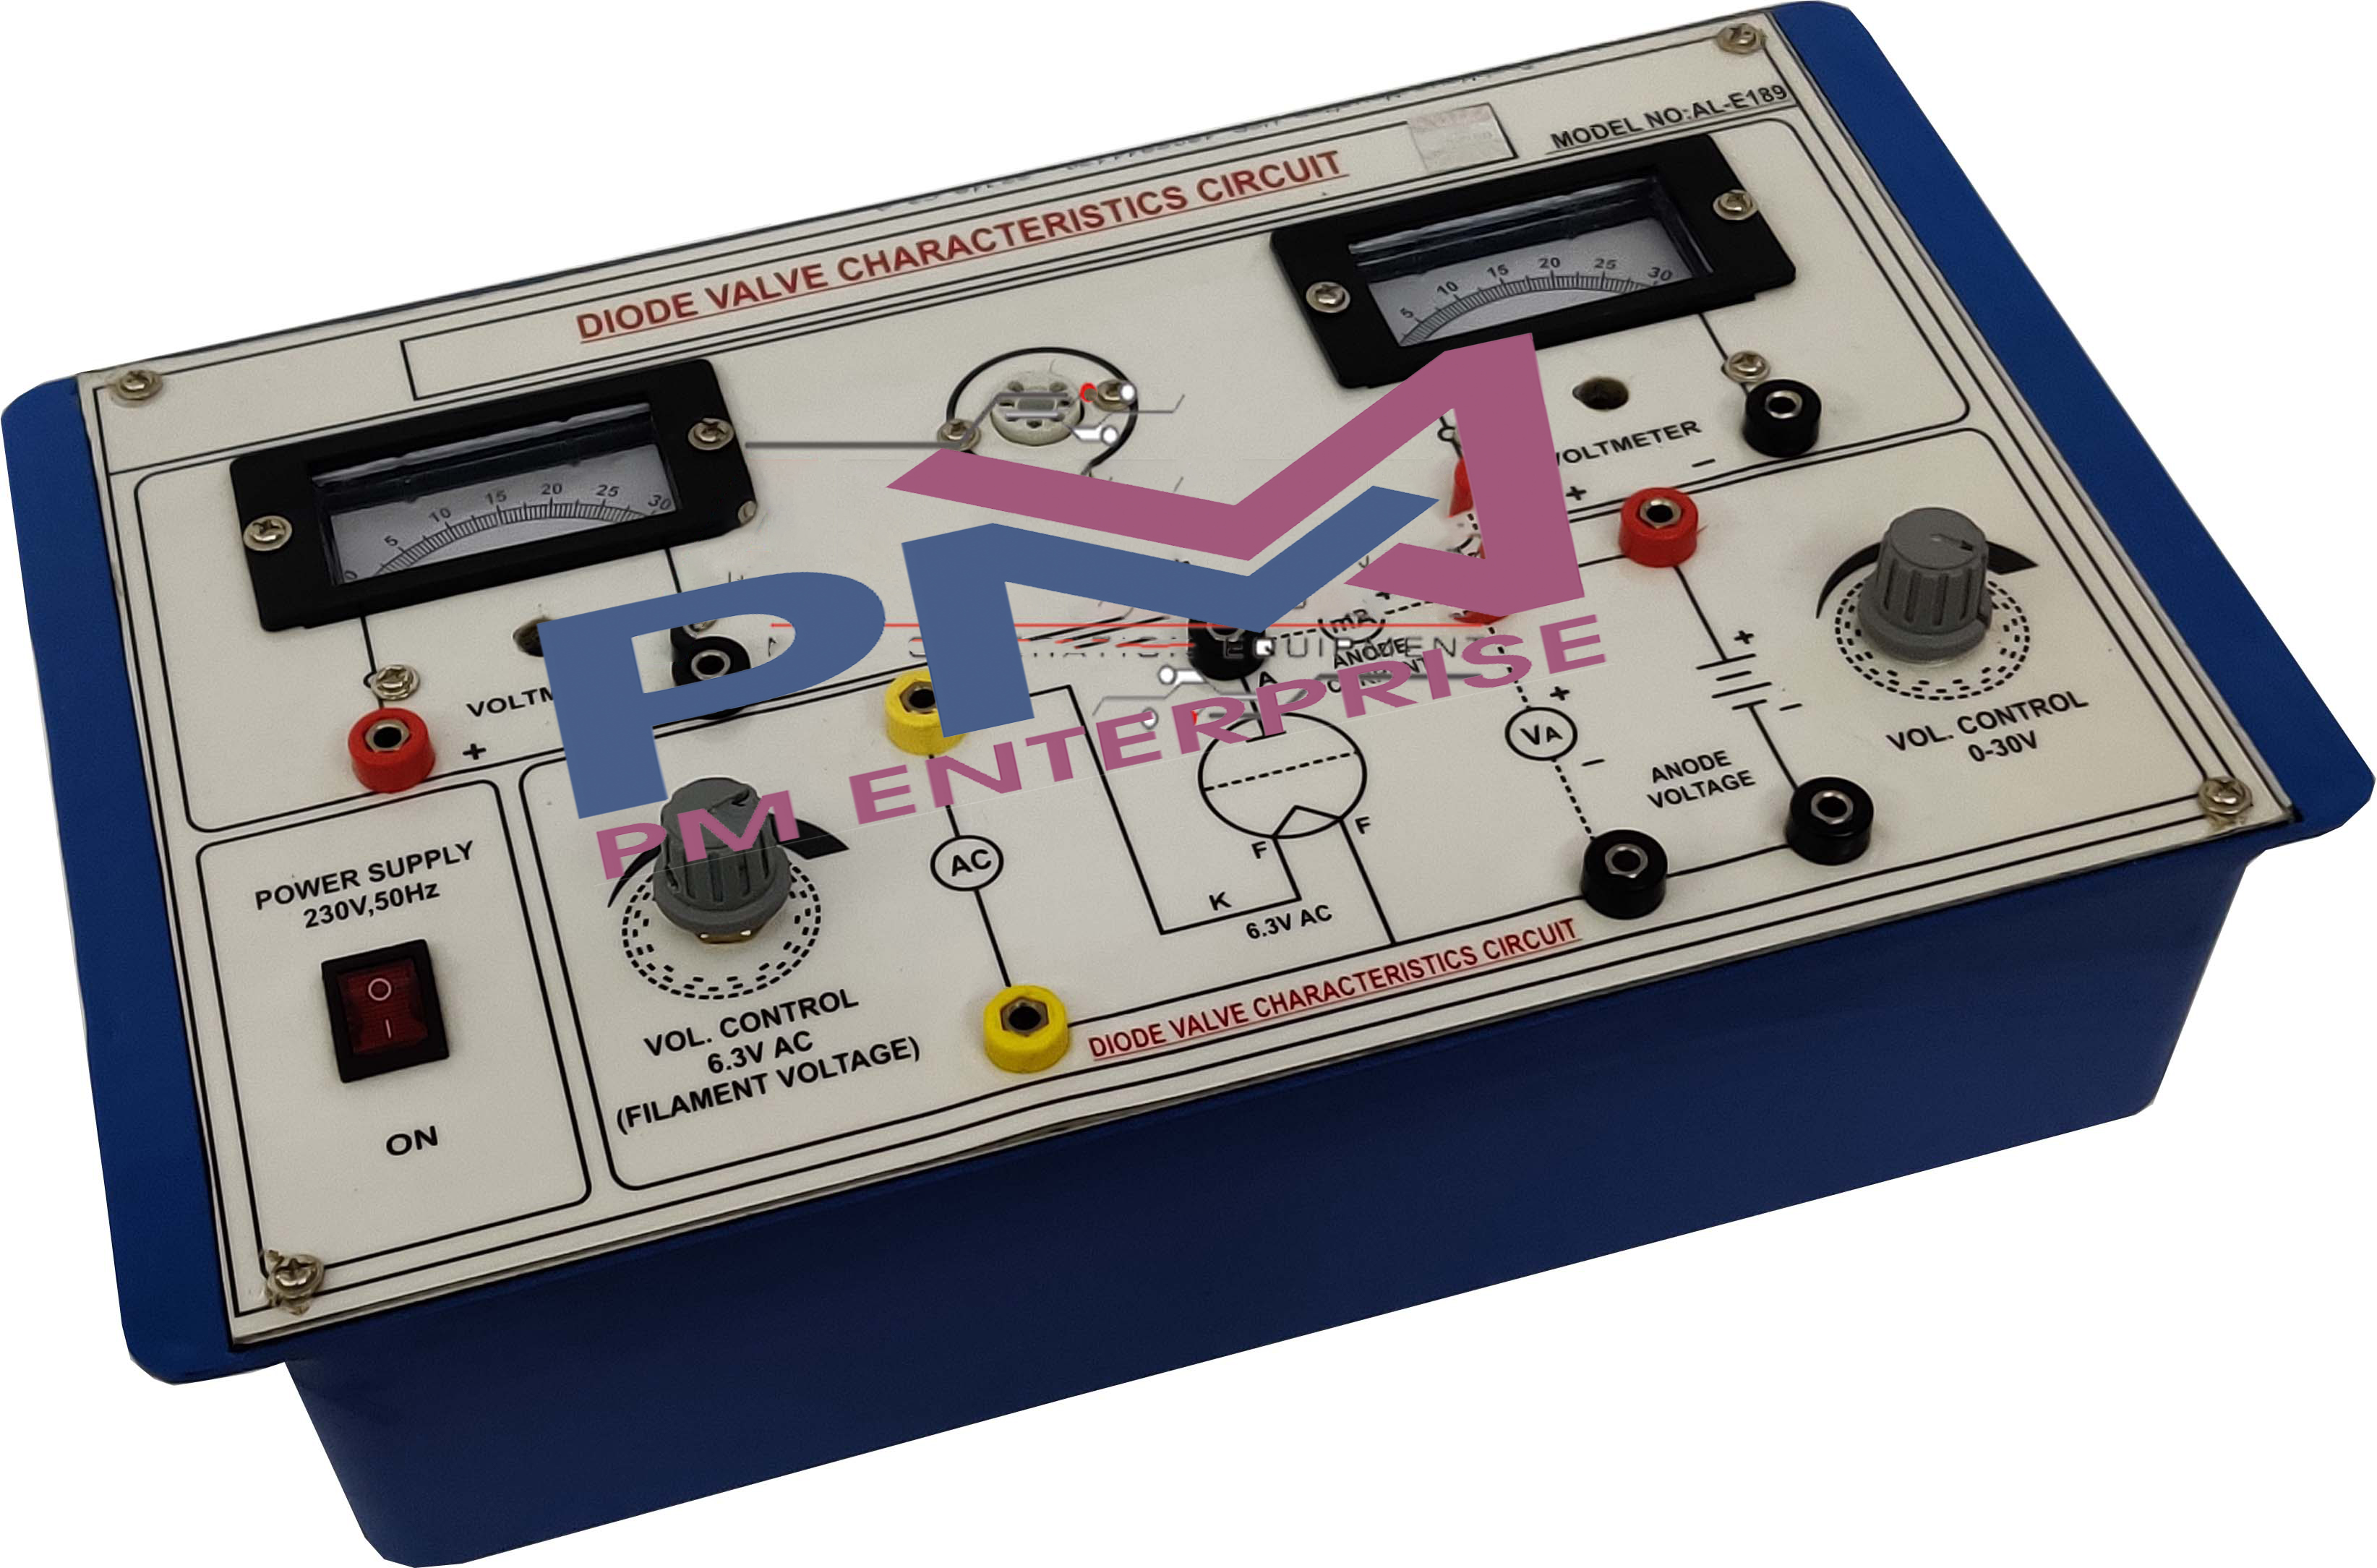 PM-P189A DIODE VALVE CHARACTERISTICS TRAINER (ANALOG METERS)